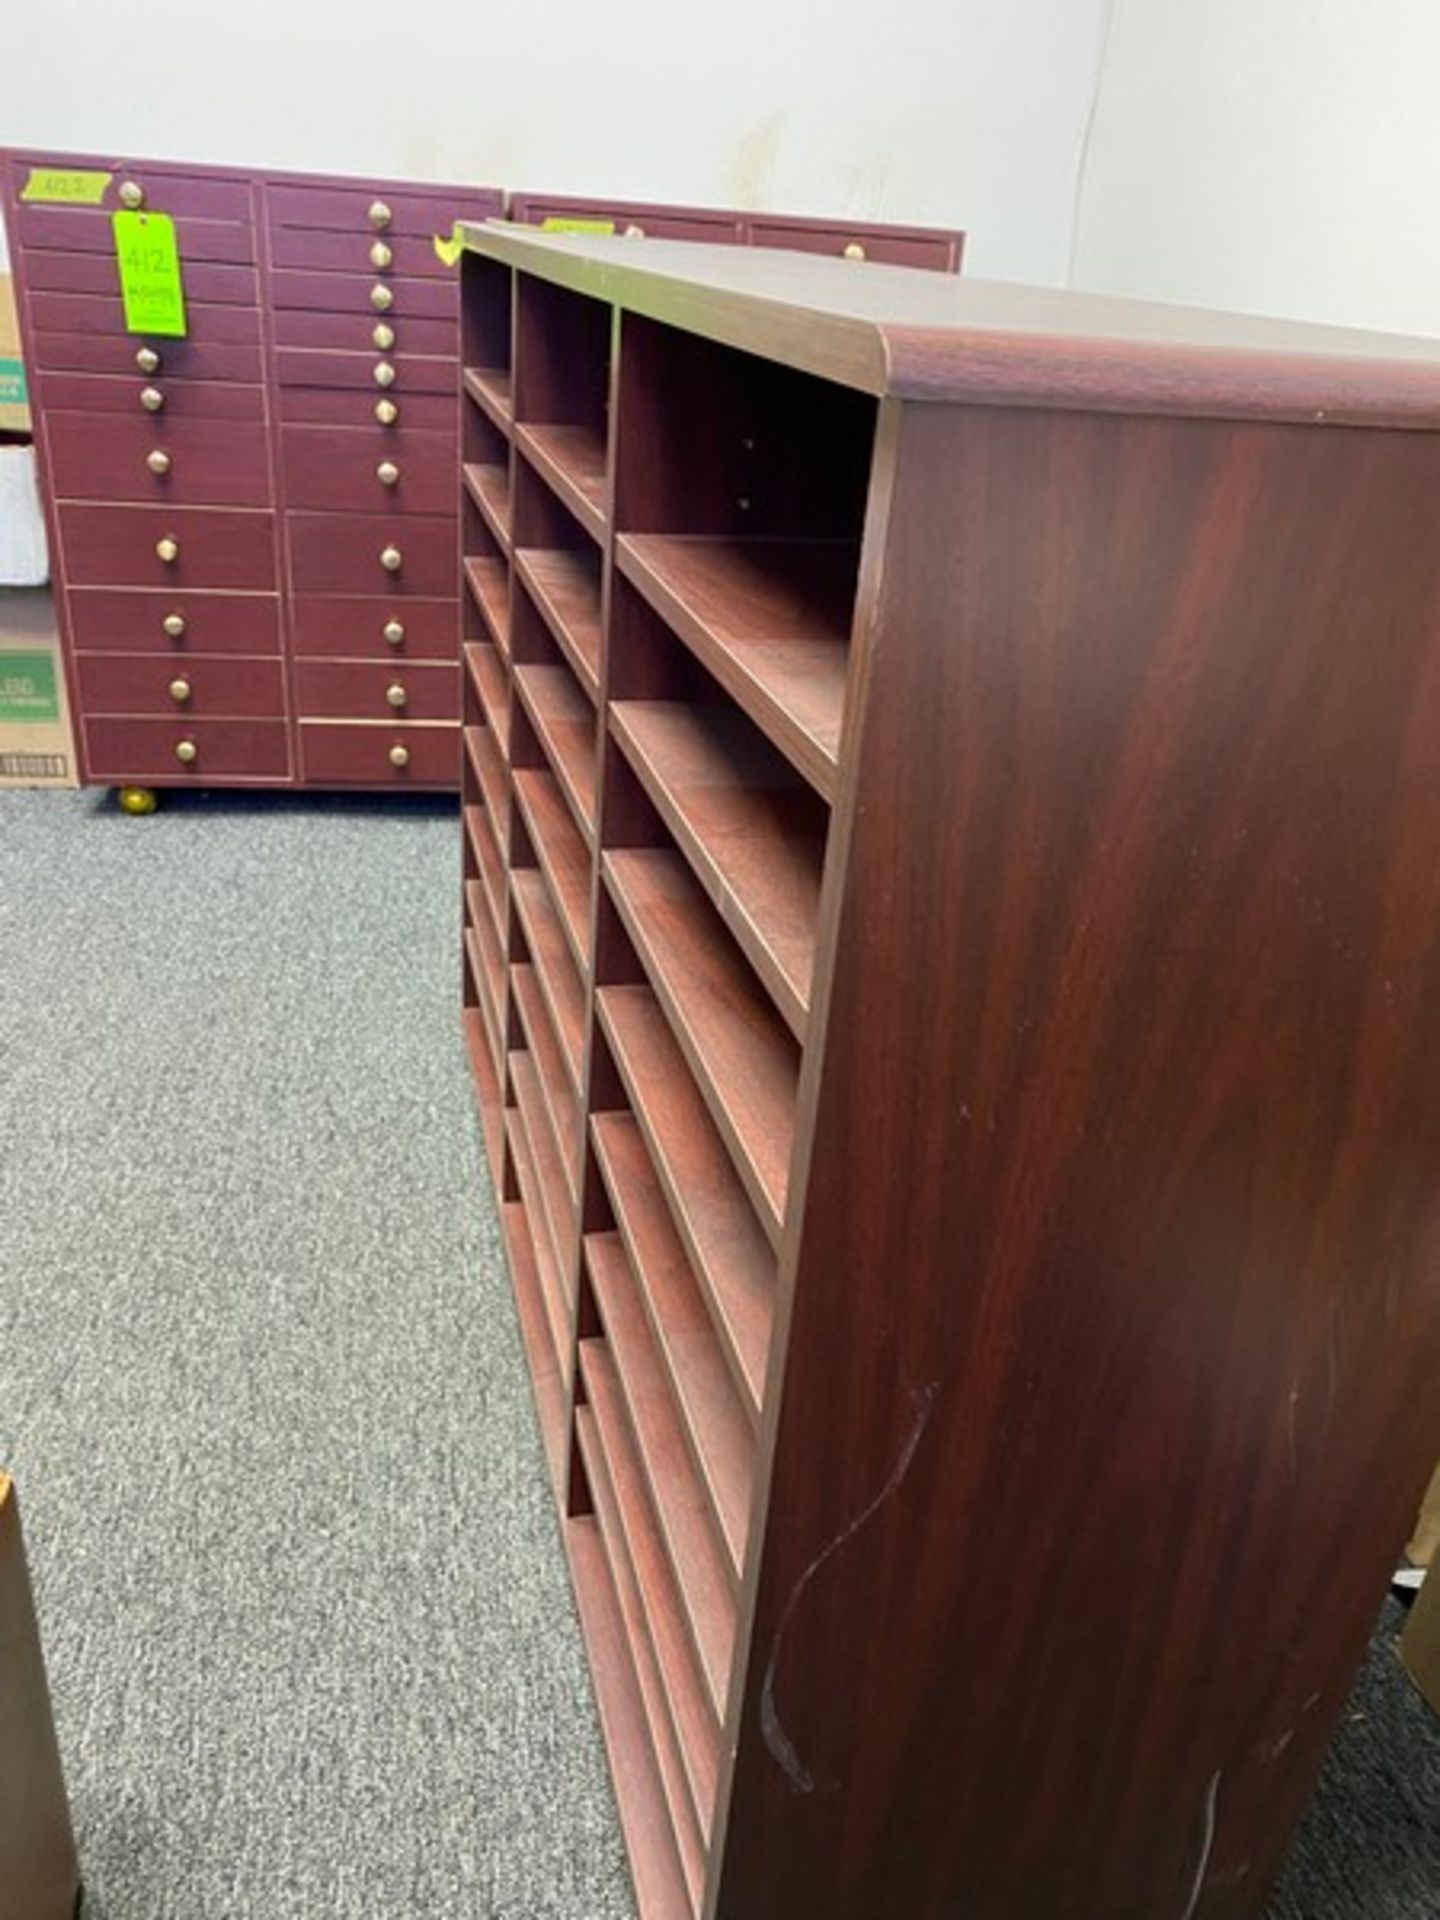 3 total office dark wood cabinets / Brochure Storage units: 2 with 22 drawers each 27.5"Wx20"Dx39. - Image 2 of 12